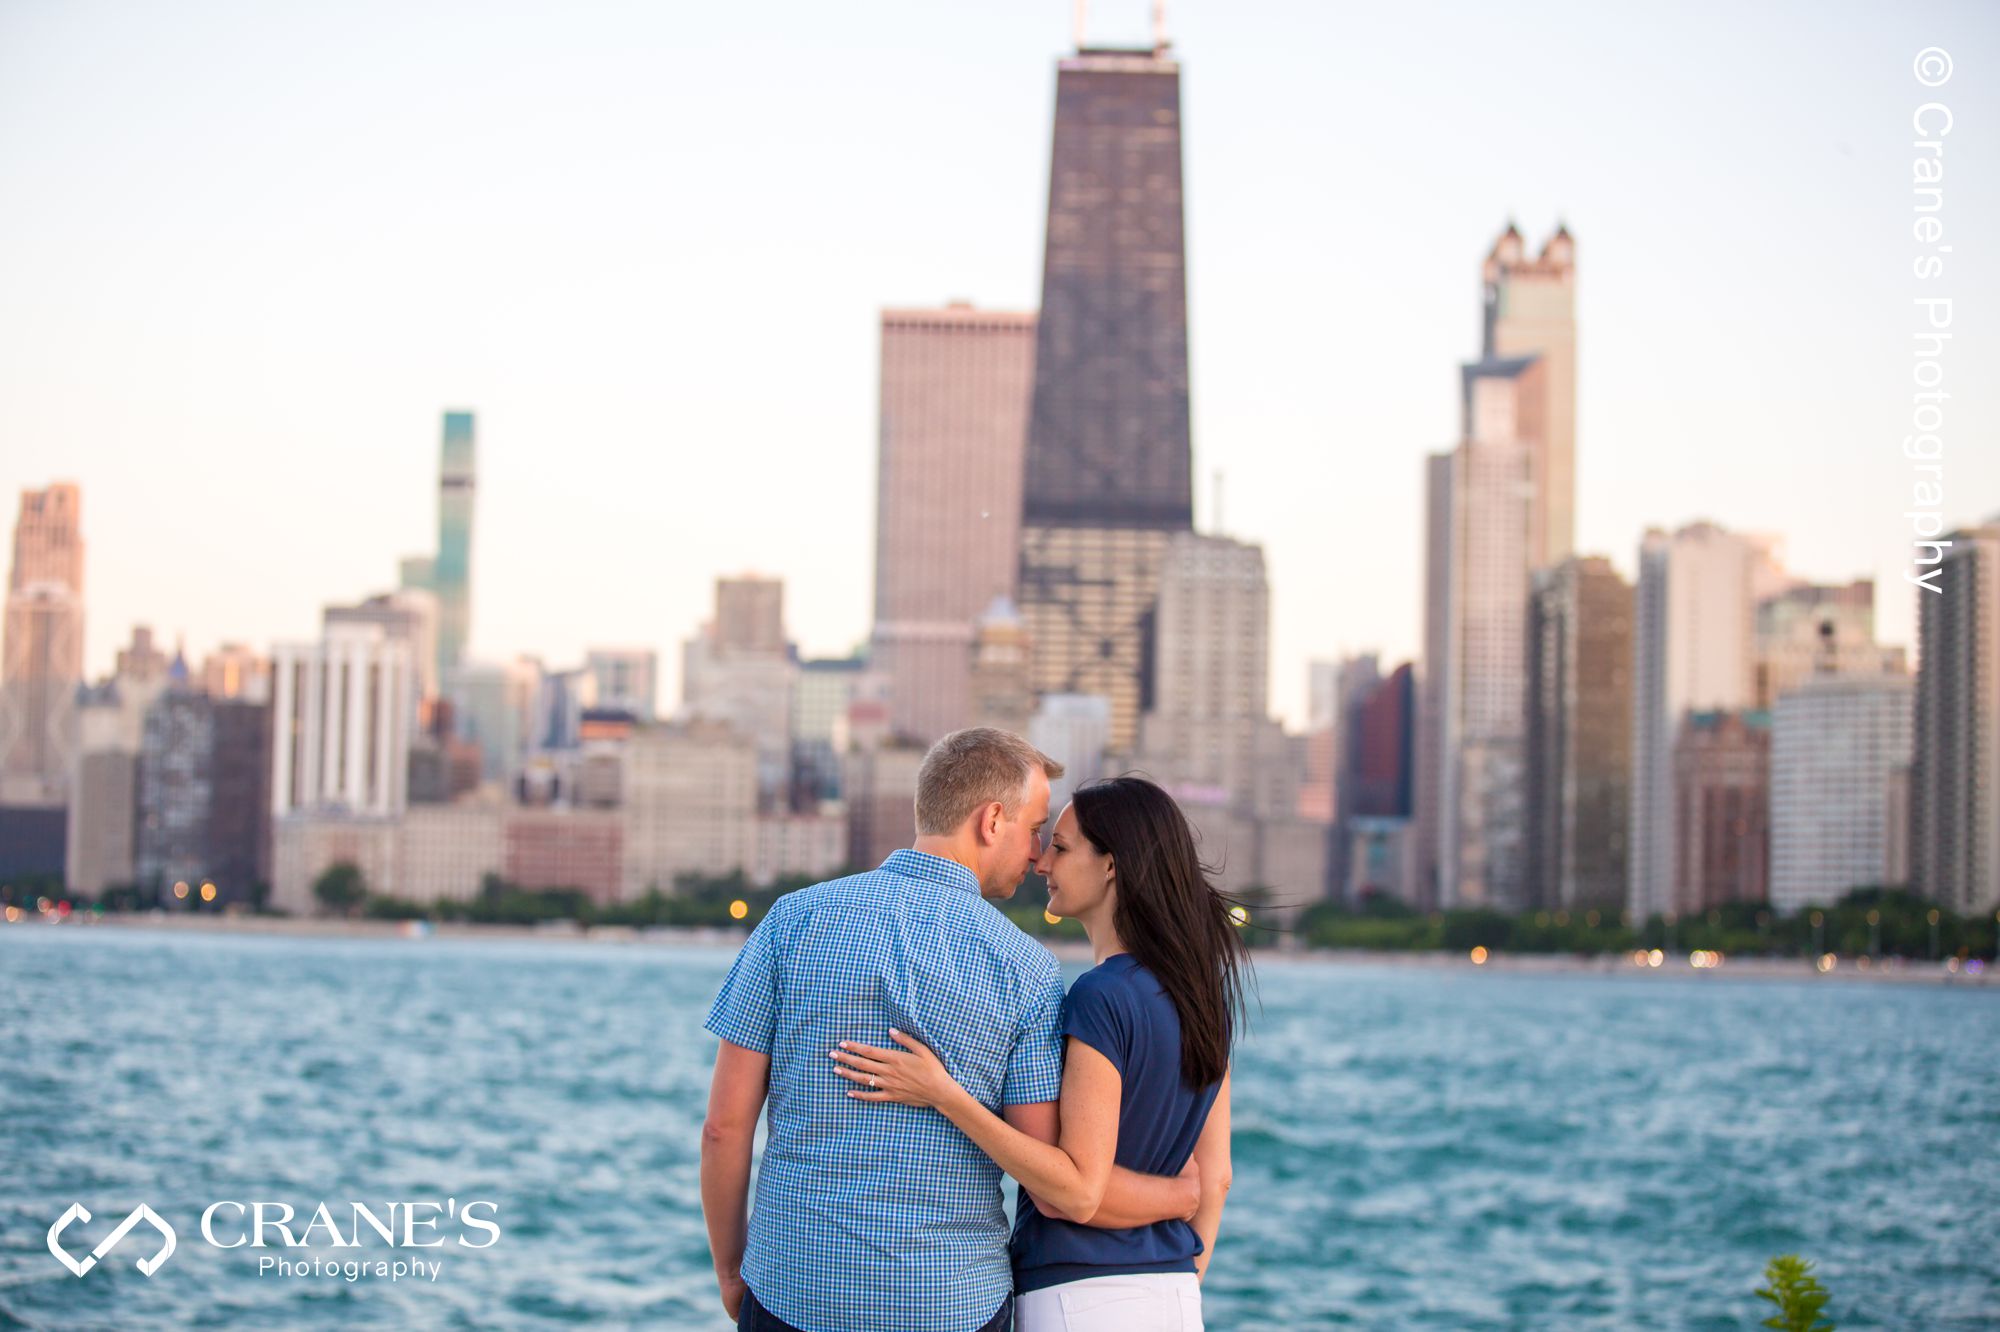 A Summer Chicago engagement session photo taken near the lake with the skyline in the background